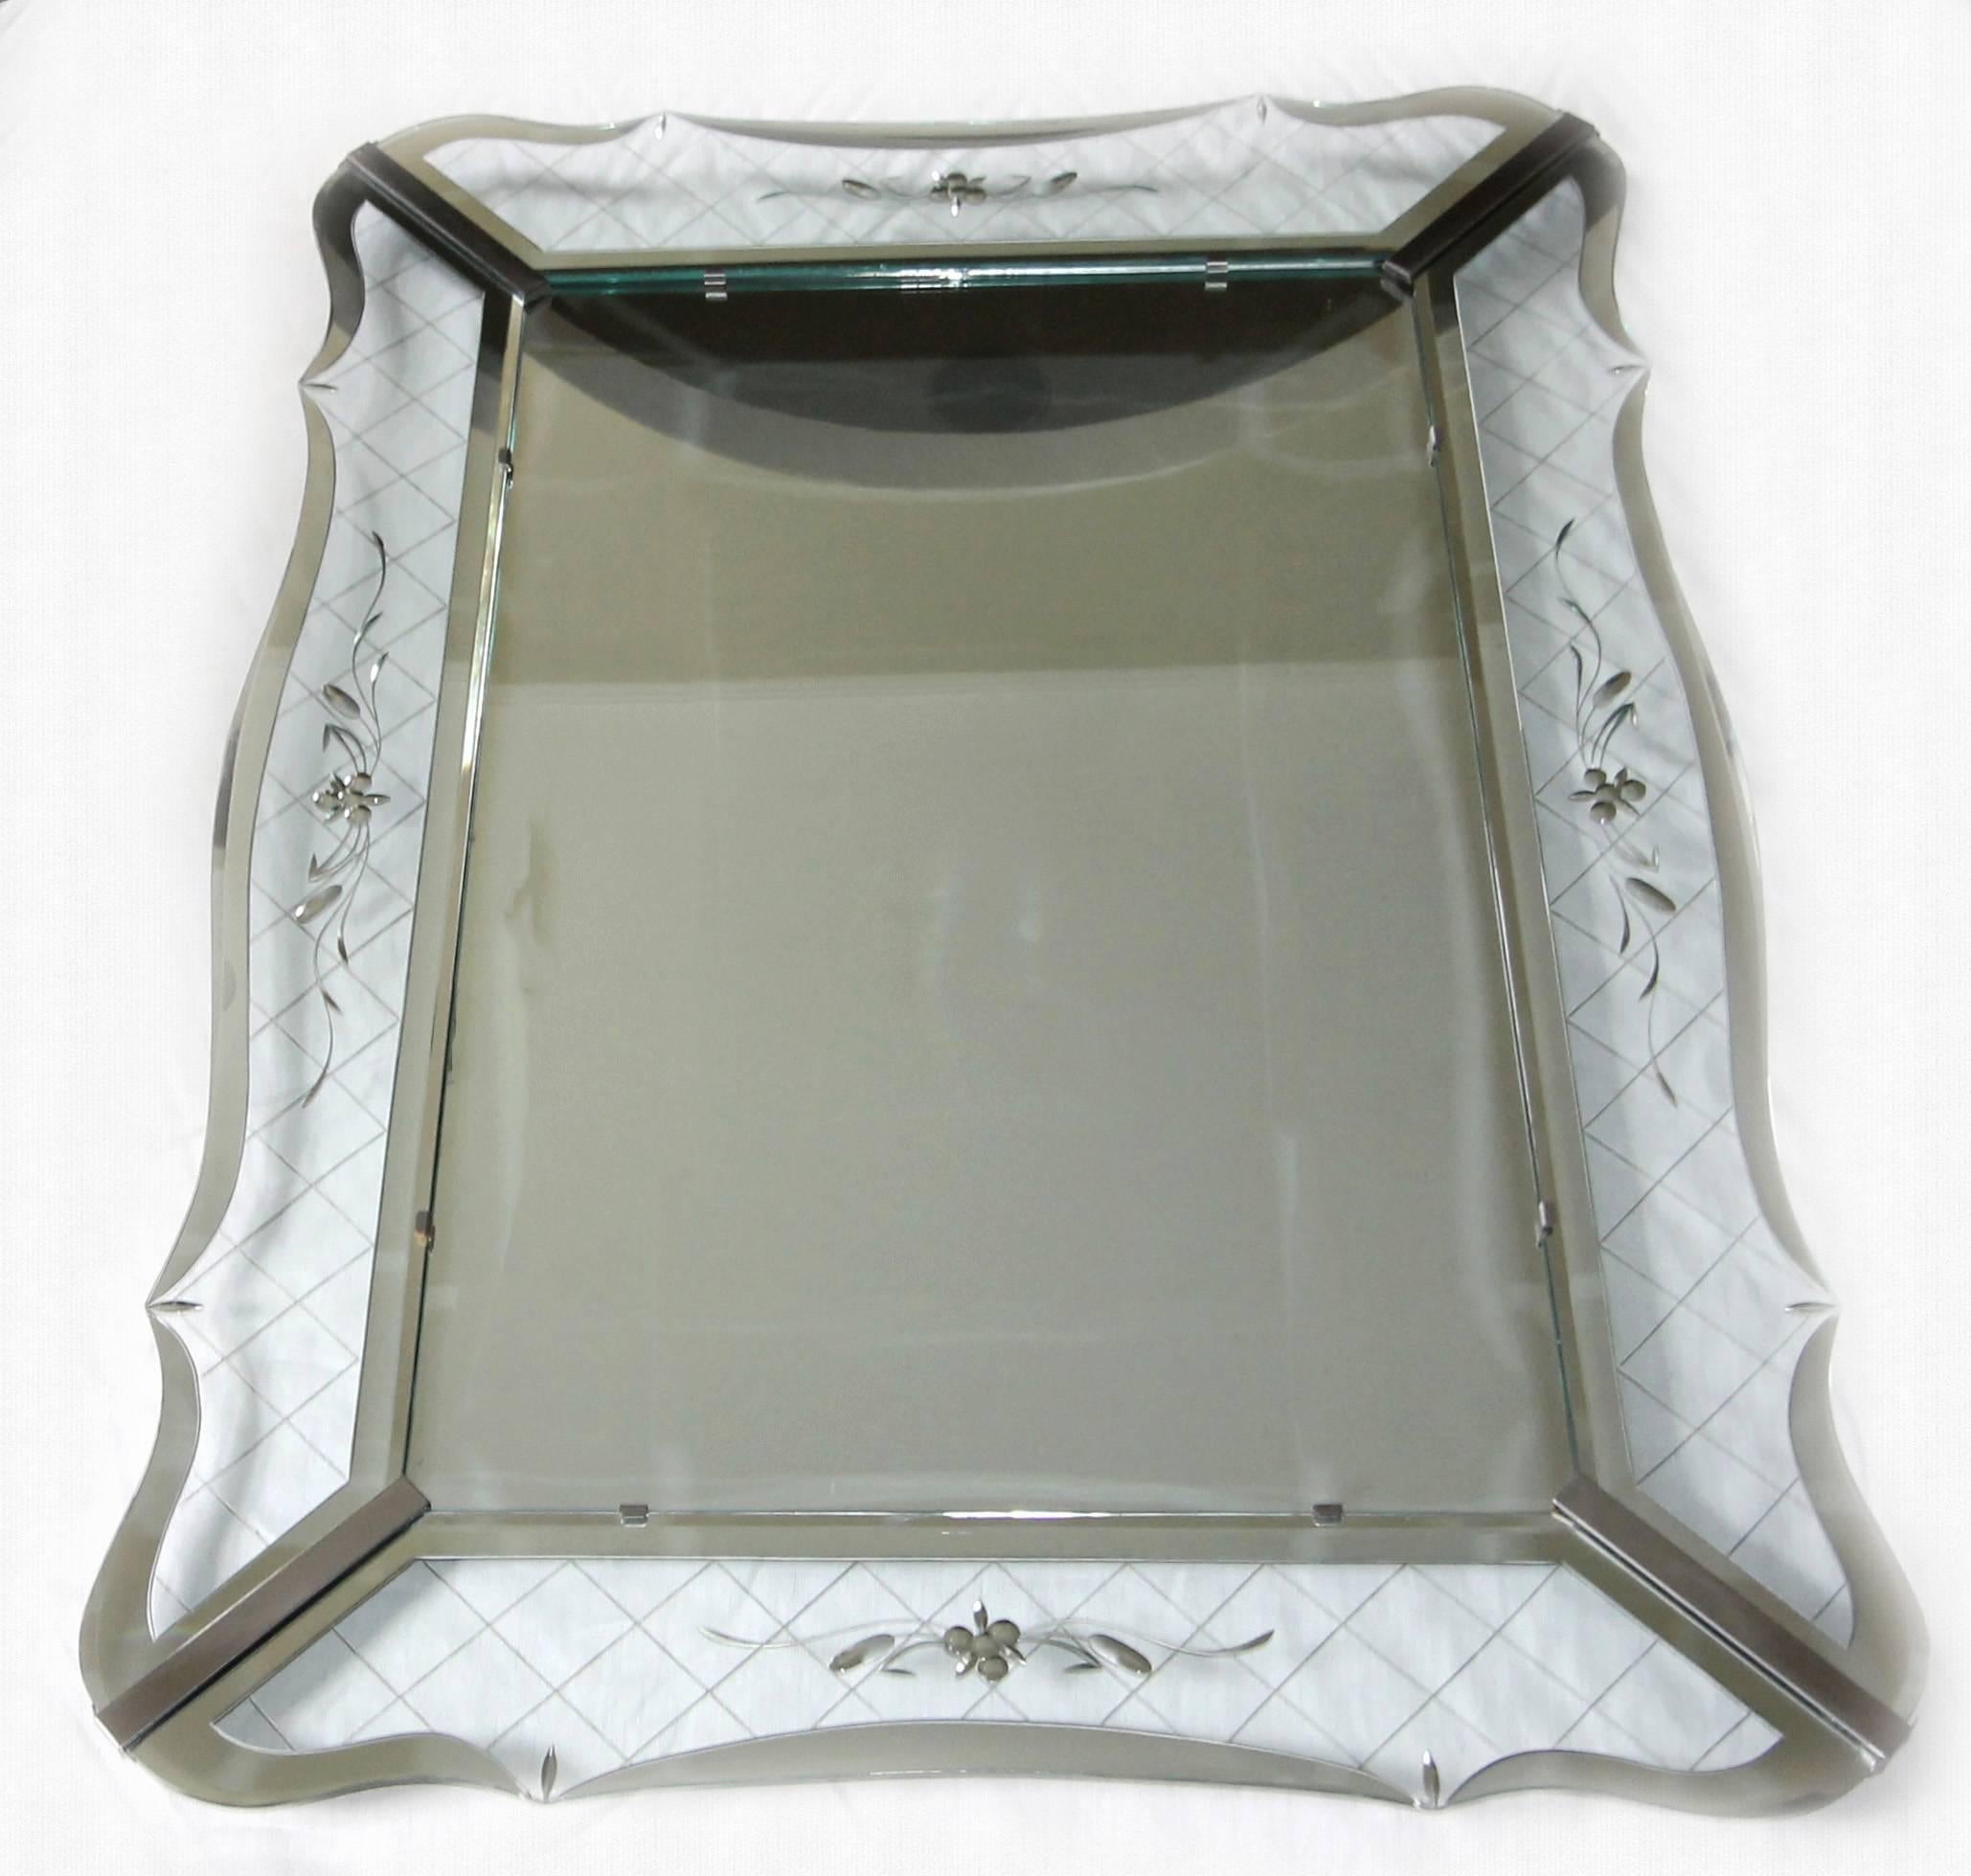 Magnificent large-scale deco style wavy edge wall mirror. The expertly crafted mirror has clear glass panels with a wheel cut and mirrored cross-hatch pattern and mirrored edges. A delicate floral and ribbon motif are central to each panel and are